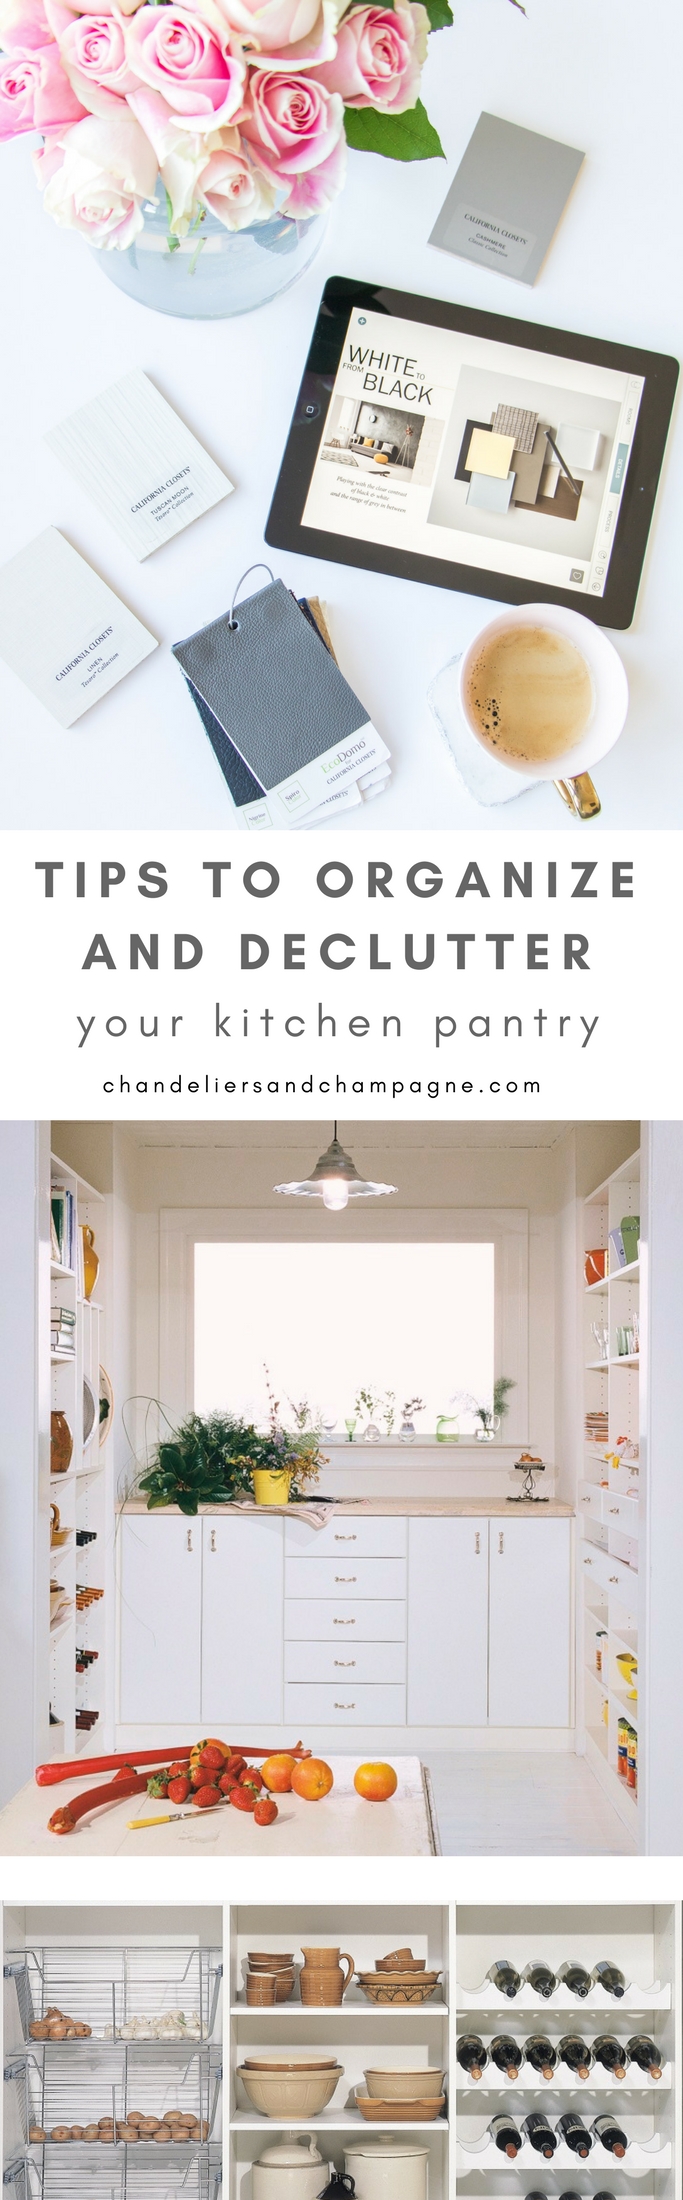 Tips to organize and declutter your kitchen pantry - 3 Easy steps to declutter and organize your walk-in pantry - Bright white kitchen pantries